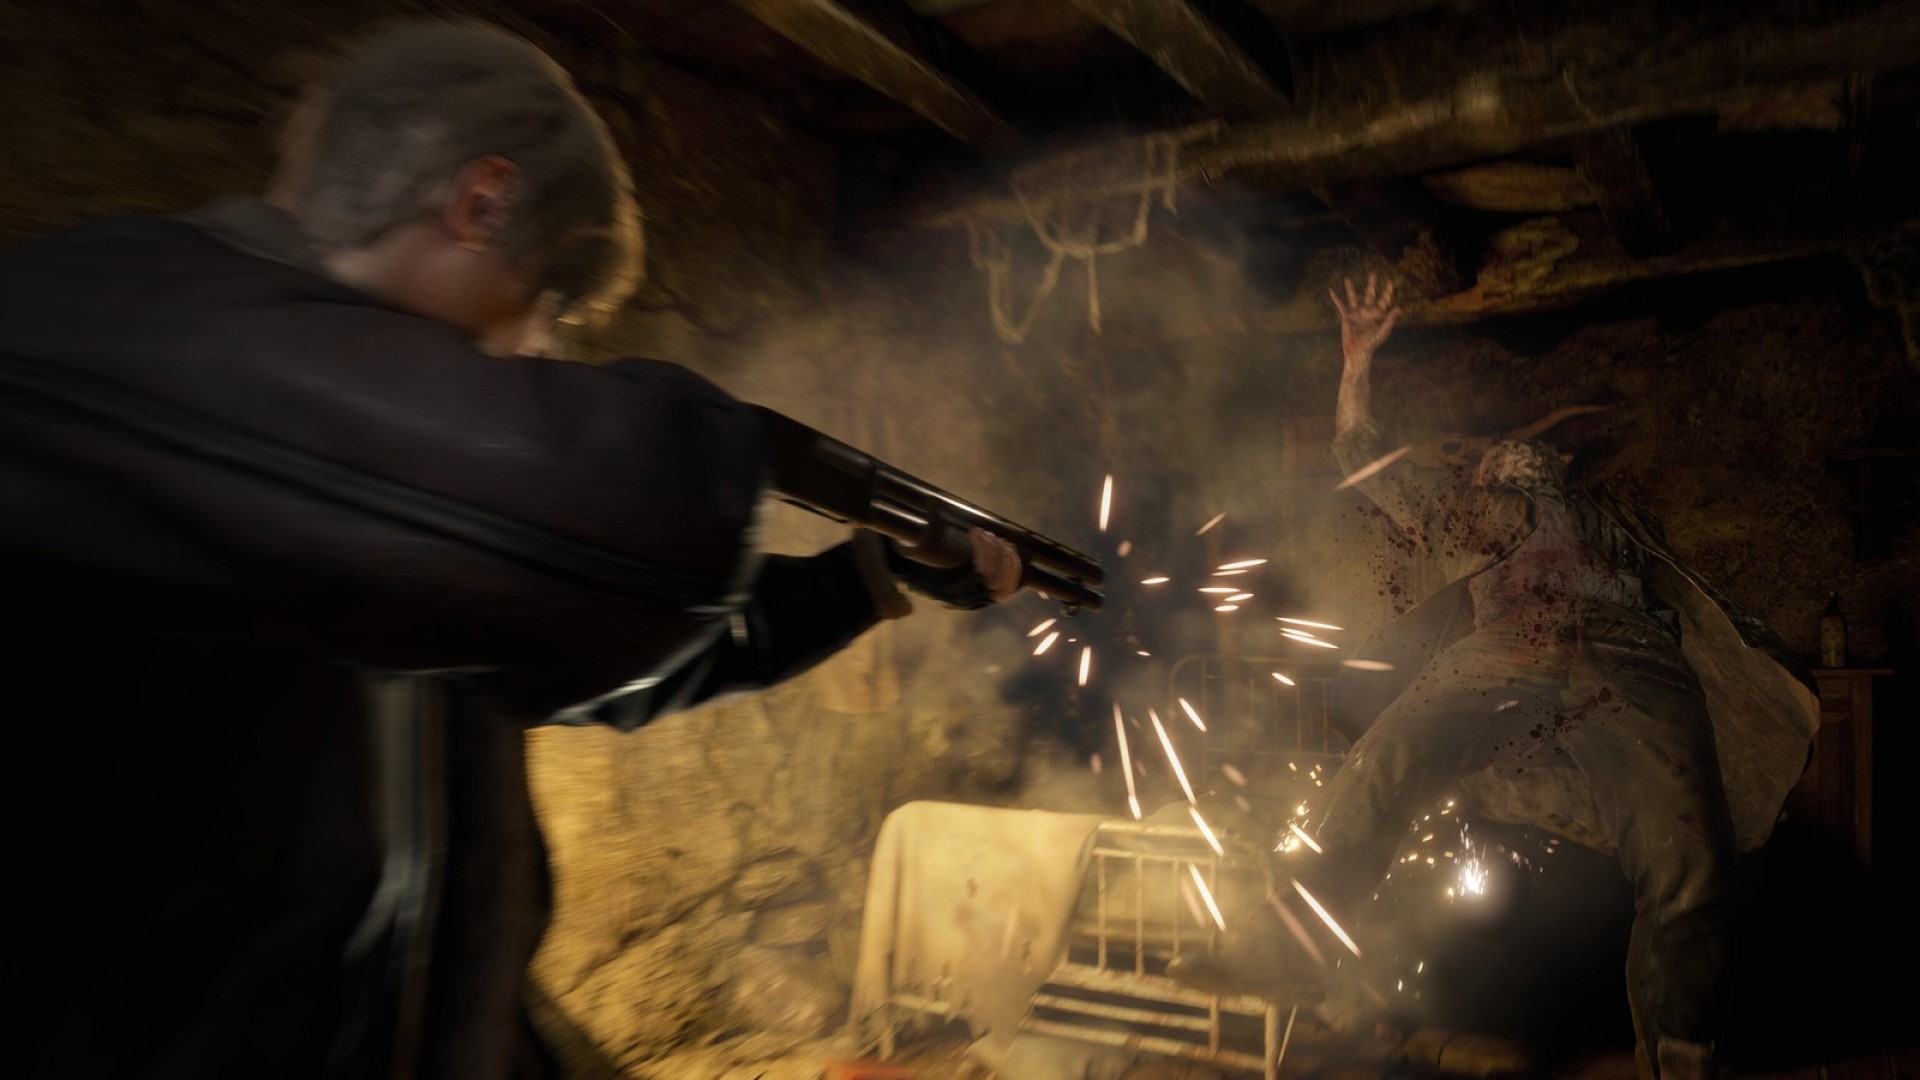 Resident Evil 4 Remake Pre-Loads Go Live on Xbox Series X/S, Requires 67 GB  of Storage Space